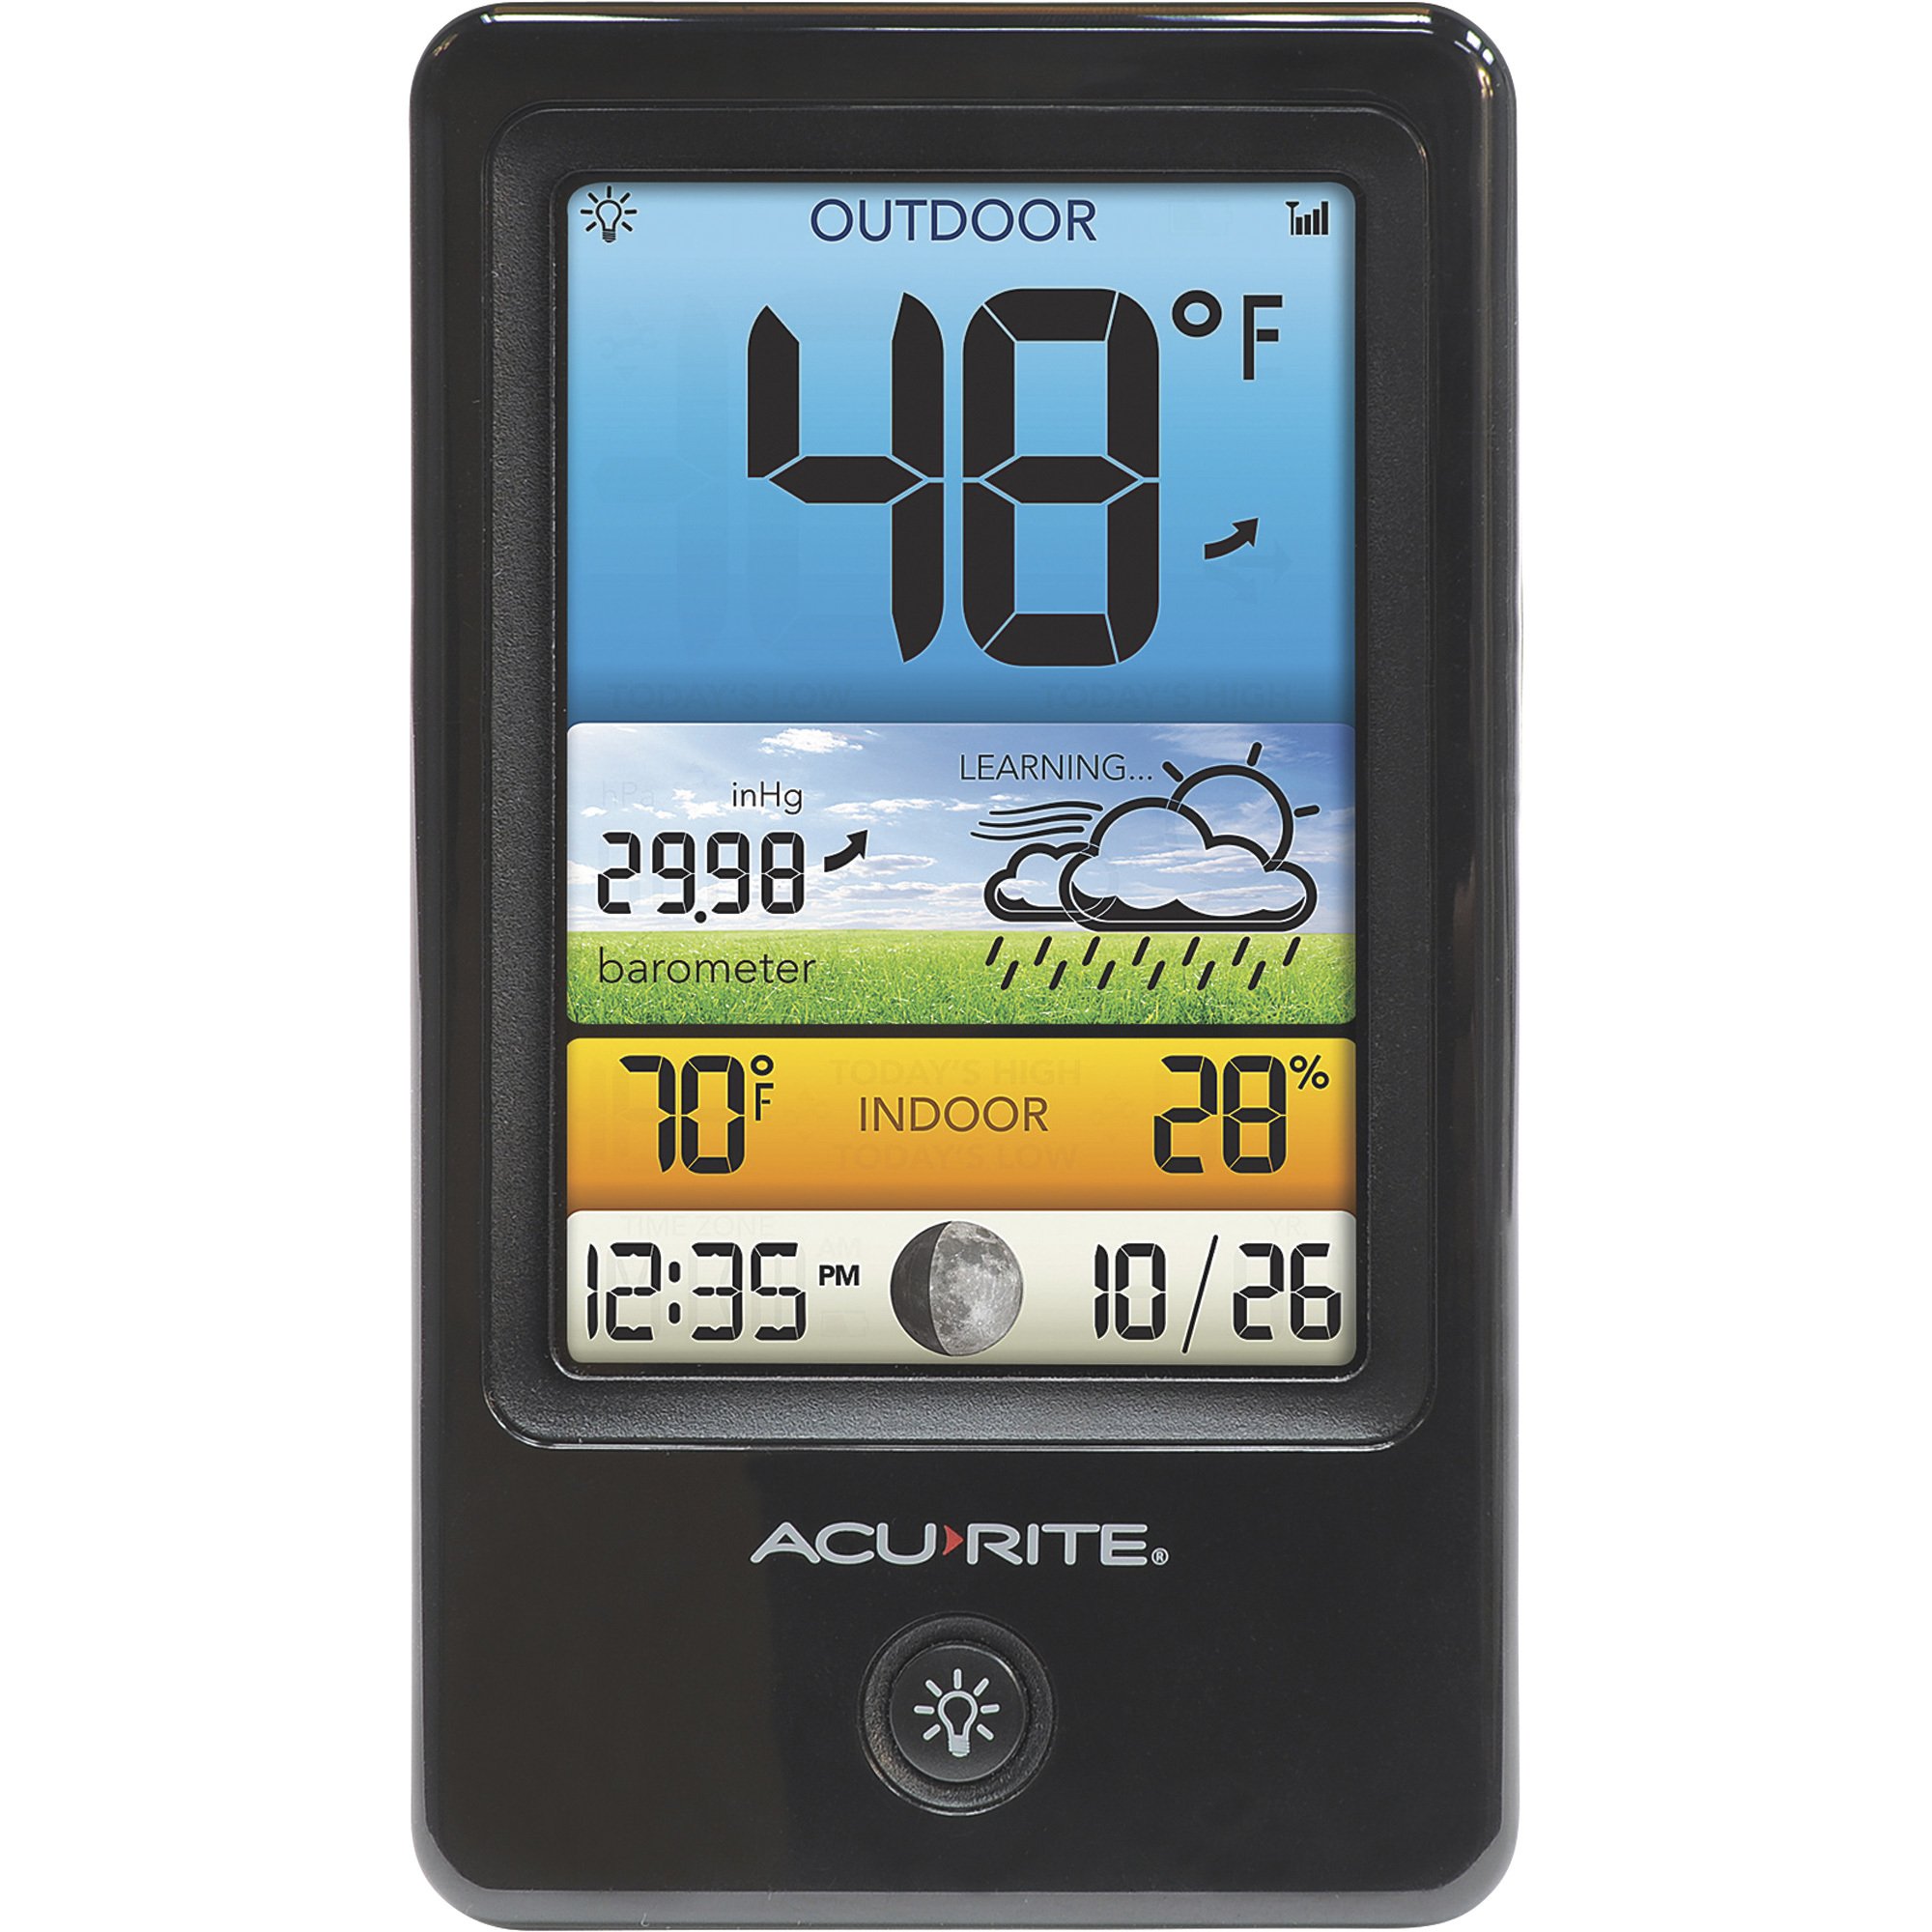 AcuRite Indoor Outdoor Weather Resistant Wall Thermometer for sale online